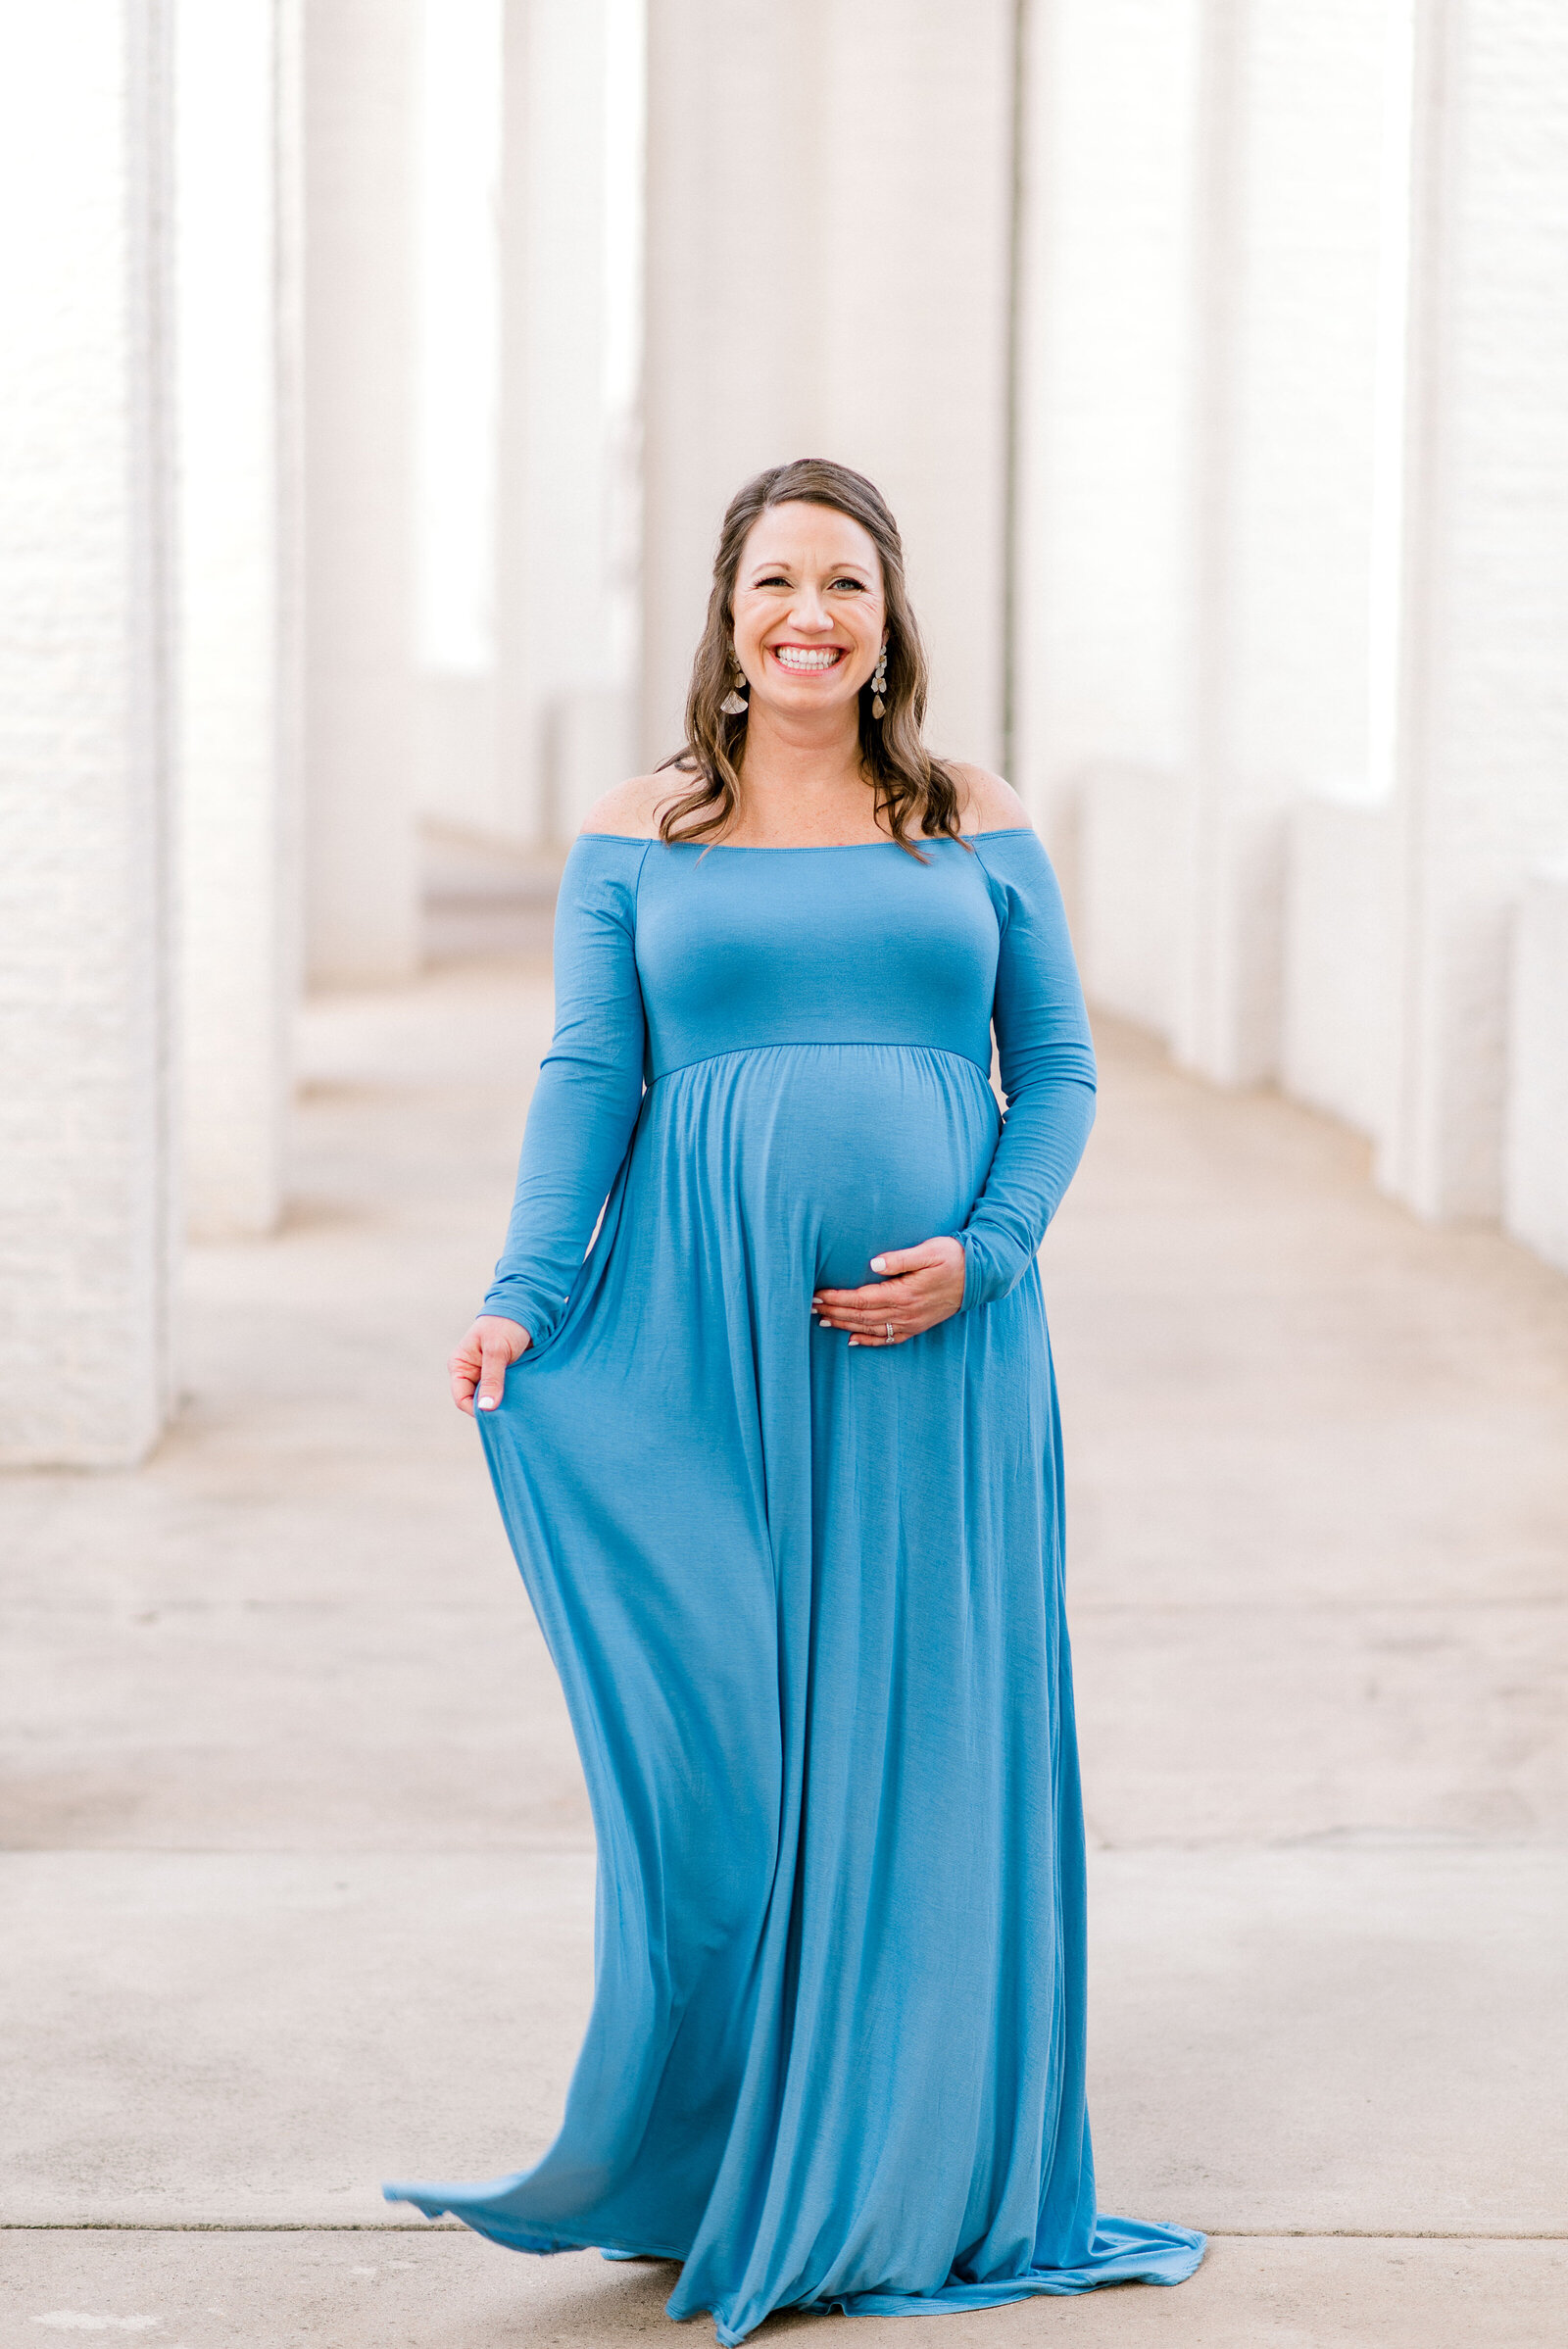 Charlotte-Maternity-Photographer-North-Carolina-Bright-and-Airy-Alyssa-Frost-Photography-Uptown-Charlotte-6